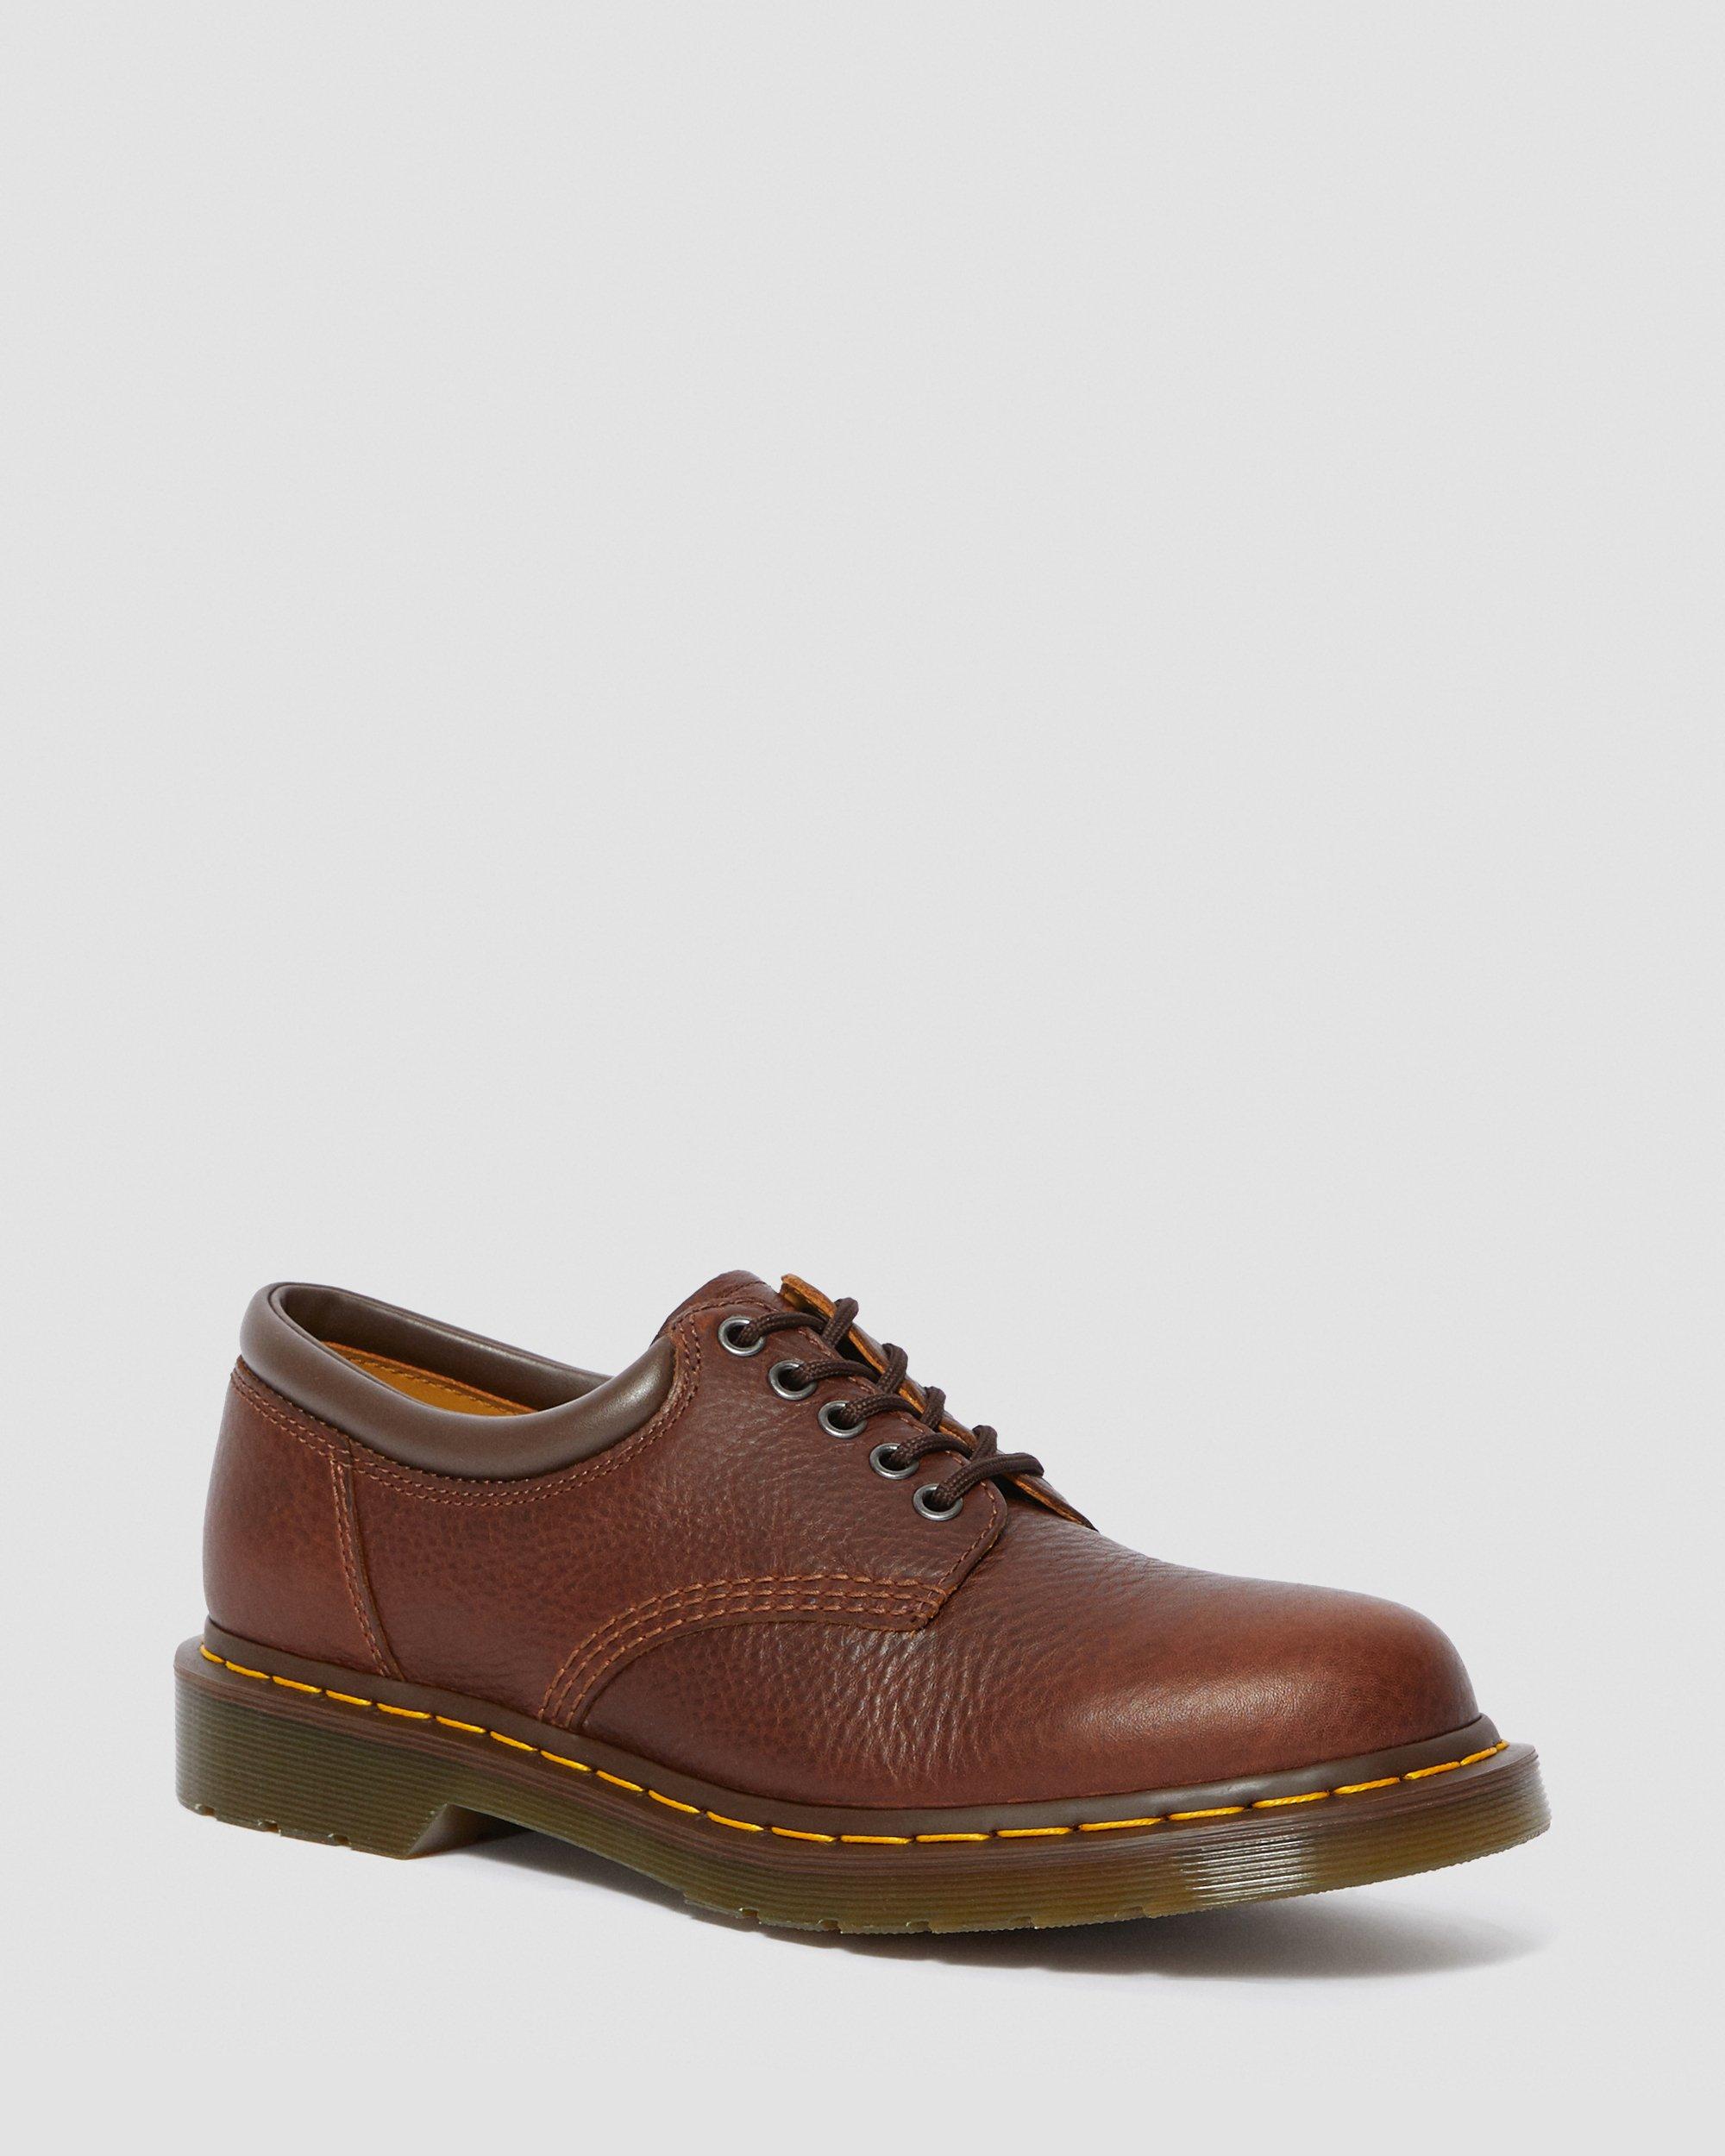 8053 Harvest Leather Casual Shoes | Dr. Martens